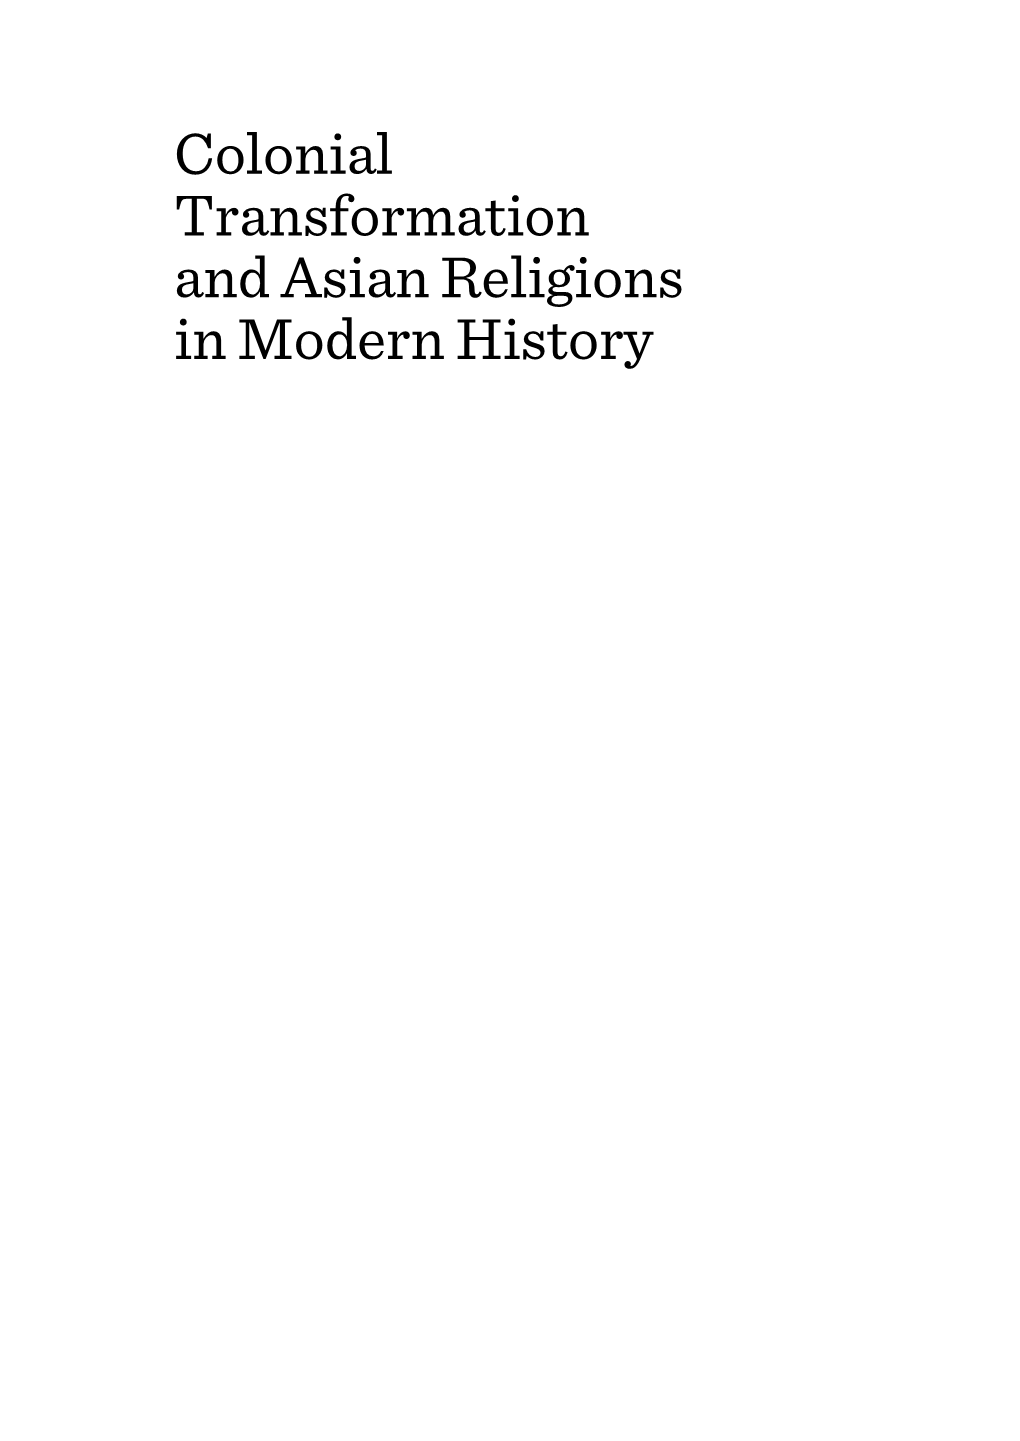 Colonial Transformation and Asian Religions in Modern History